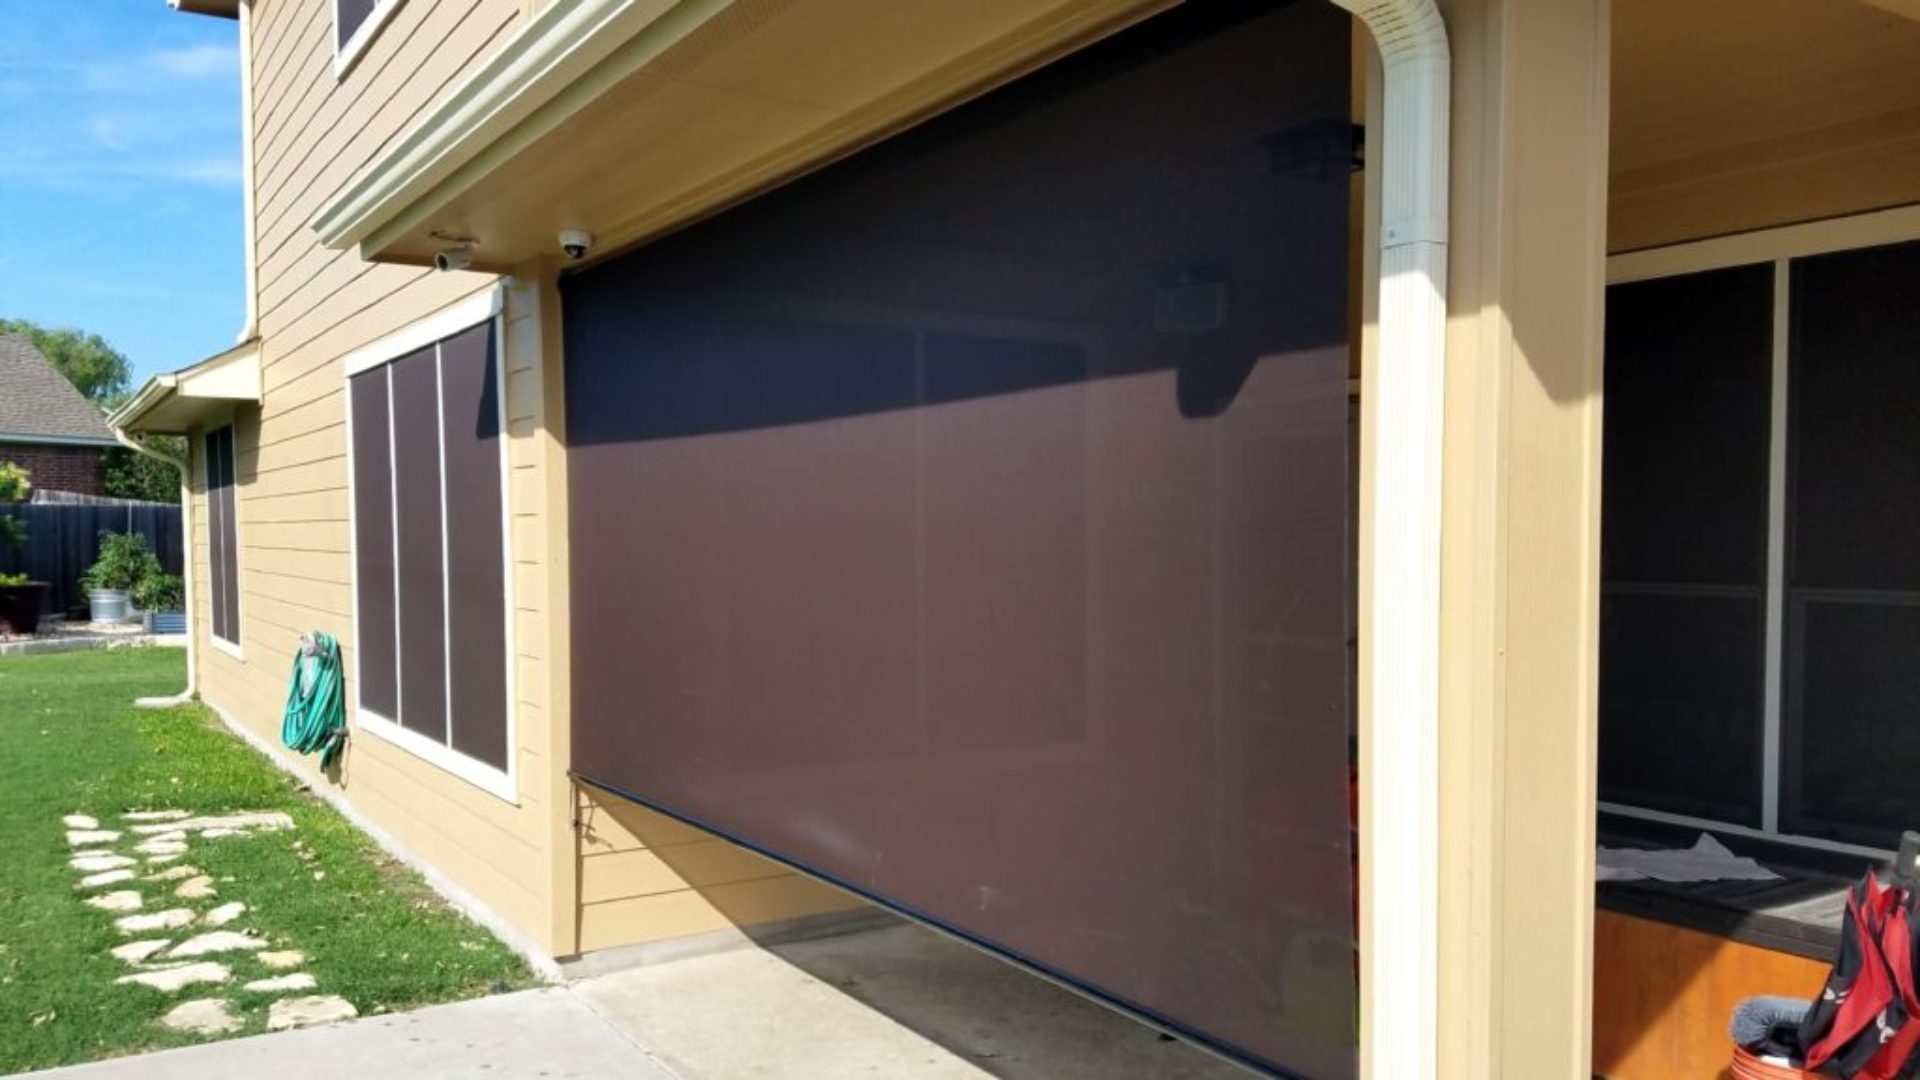 Sun Shades For Patios Visualhunt, Outdoor Solar Screens For Patio